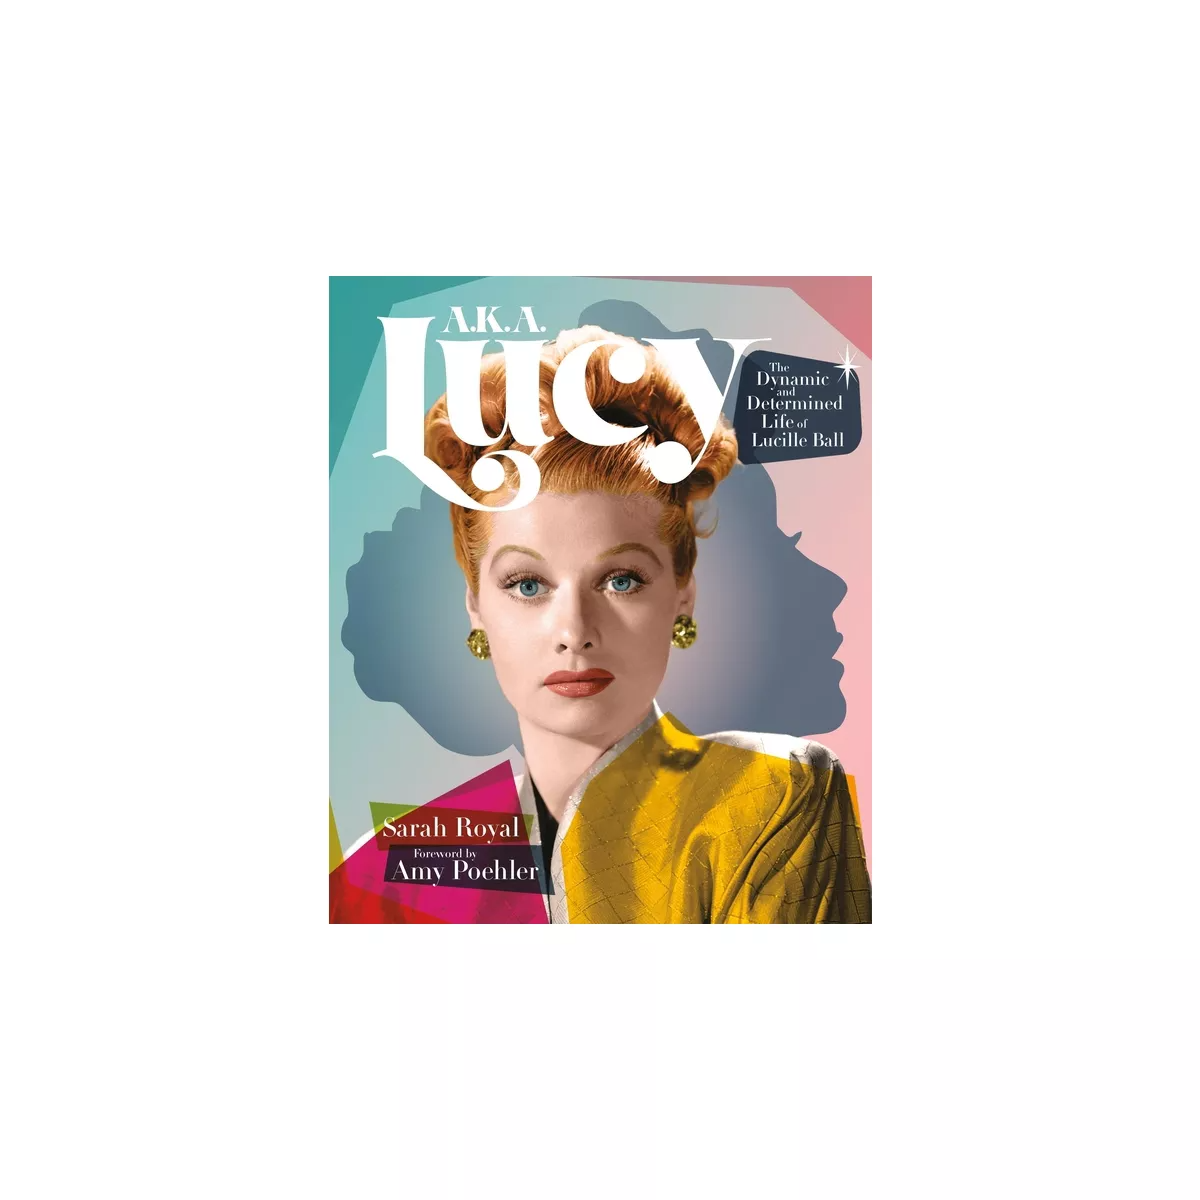 A.K.A. Lucy - The Dynamic and Determined Life of Lucille Ball